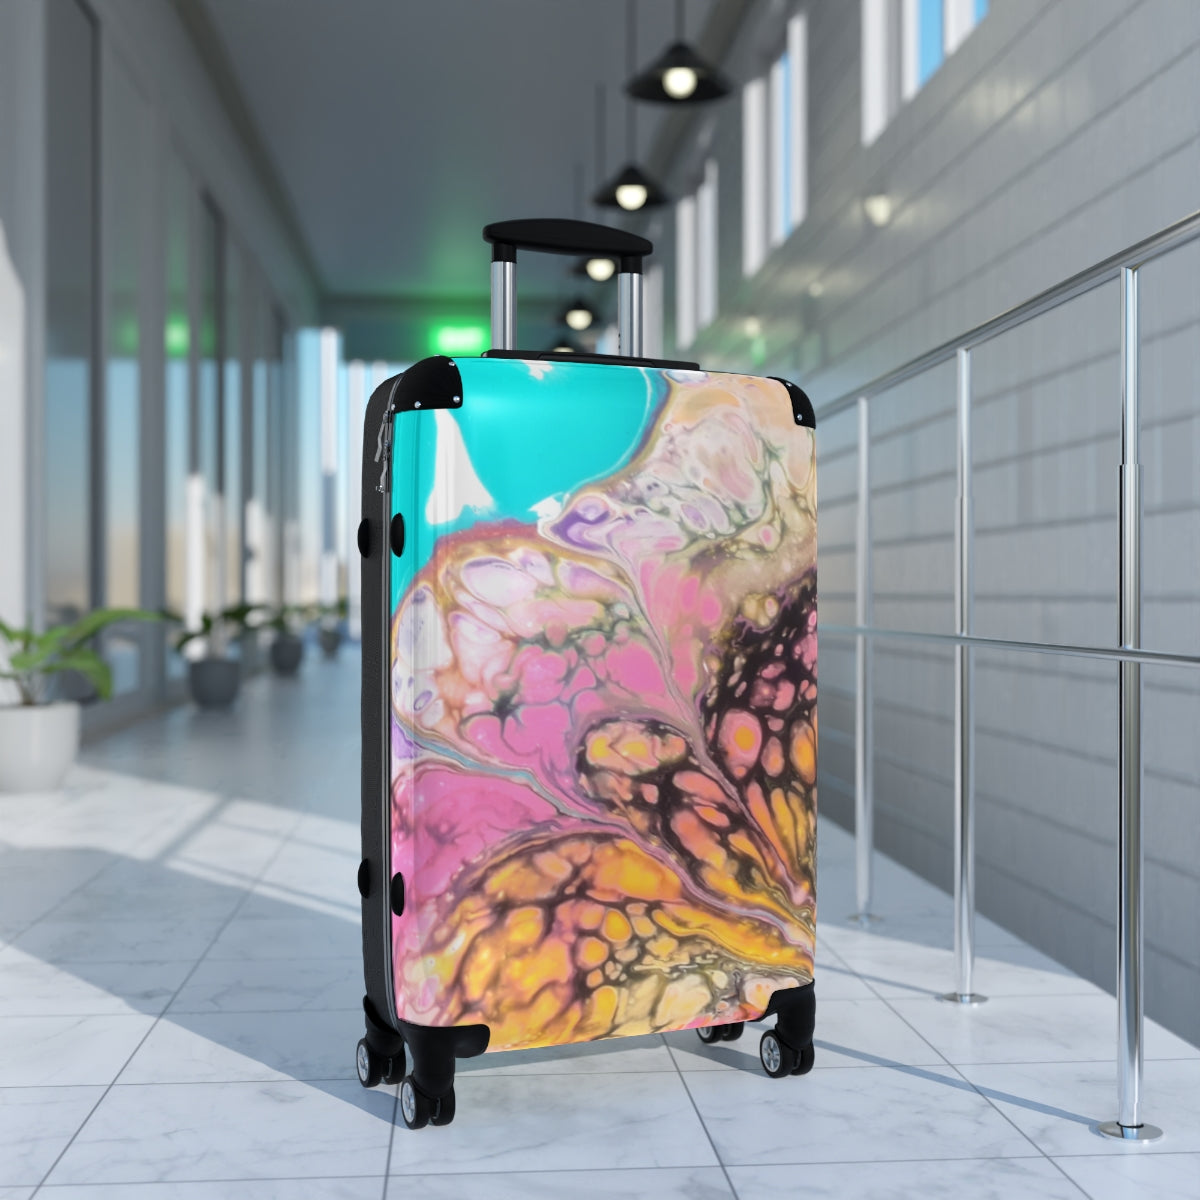 CARRY-ON SUITCASES By Artzira, Original Abstract Art Print, Cabin Suitcases, All Sizes, Luggage with Wheels, Trolly Travel Bag, Double Wheeled Spinner